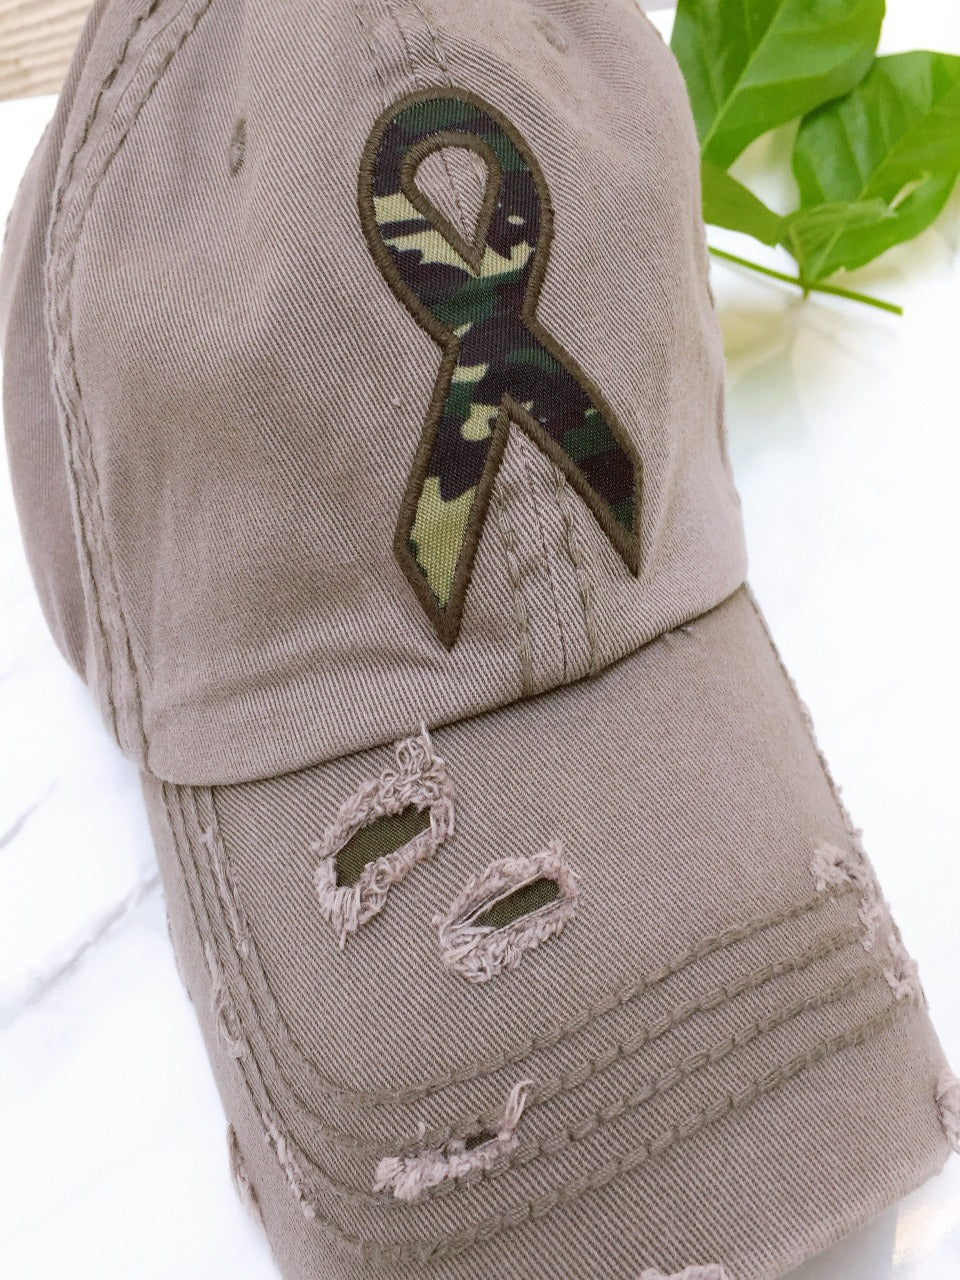 women wearing at beach SUPPORT OUR TROOP BASEBALL CAP